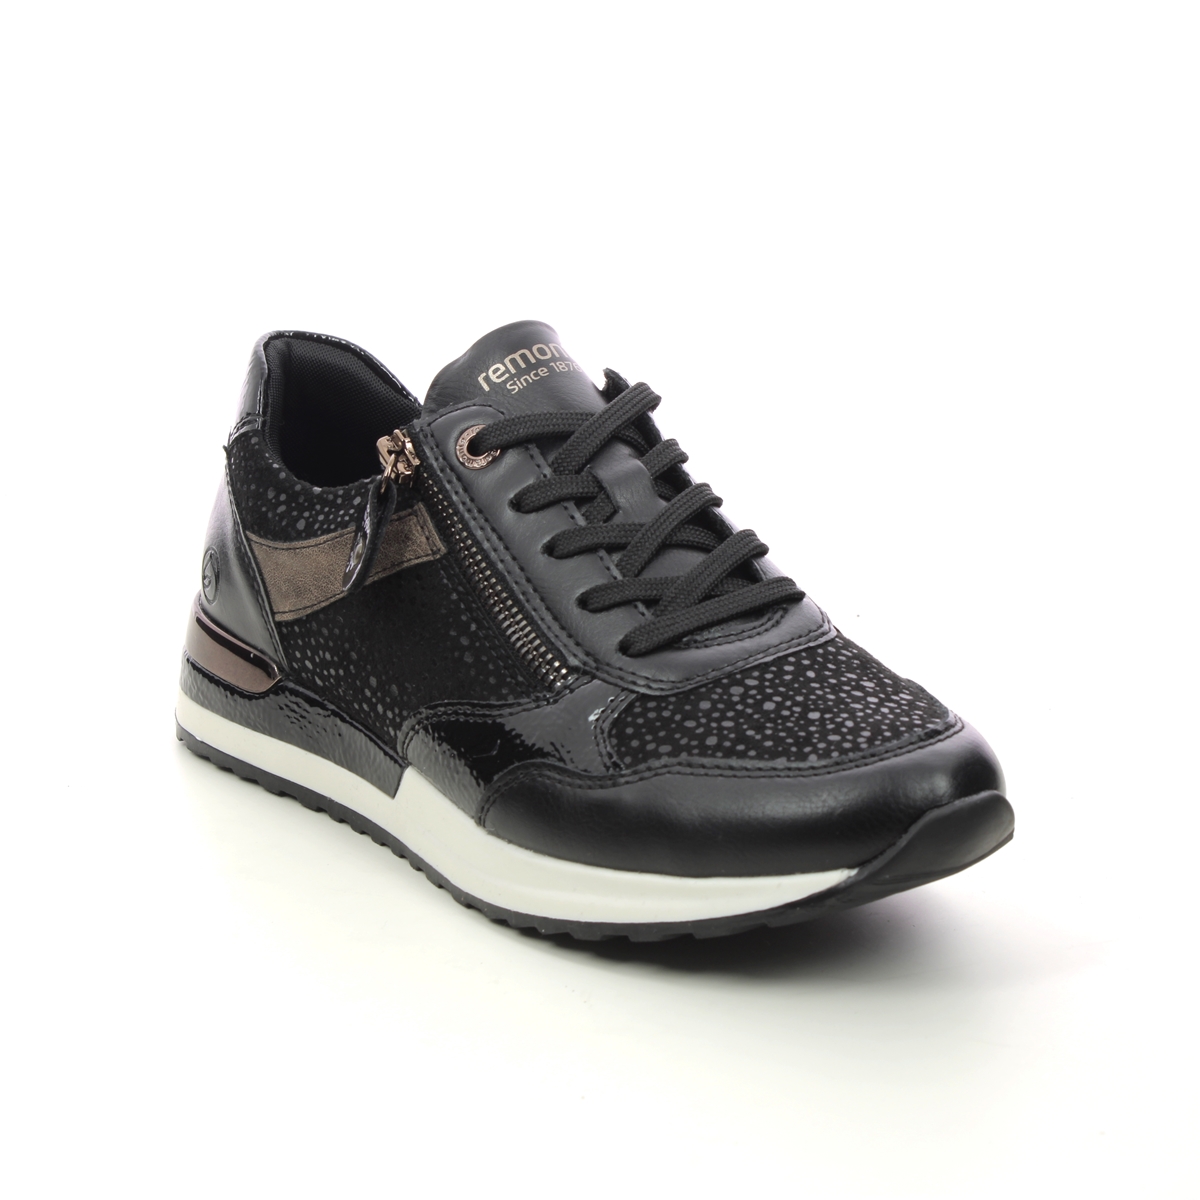 Remonte Vapour Lulea Black Womens Trainers R2548-01 In Size 40 In Plain Black